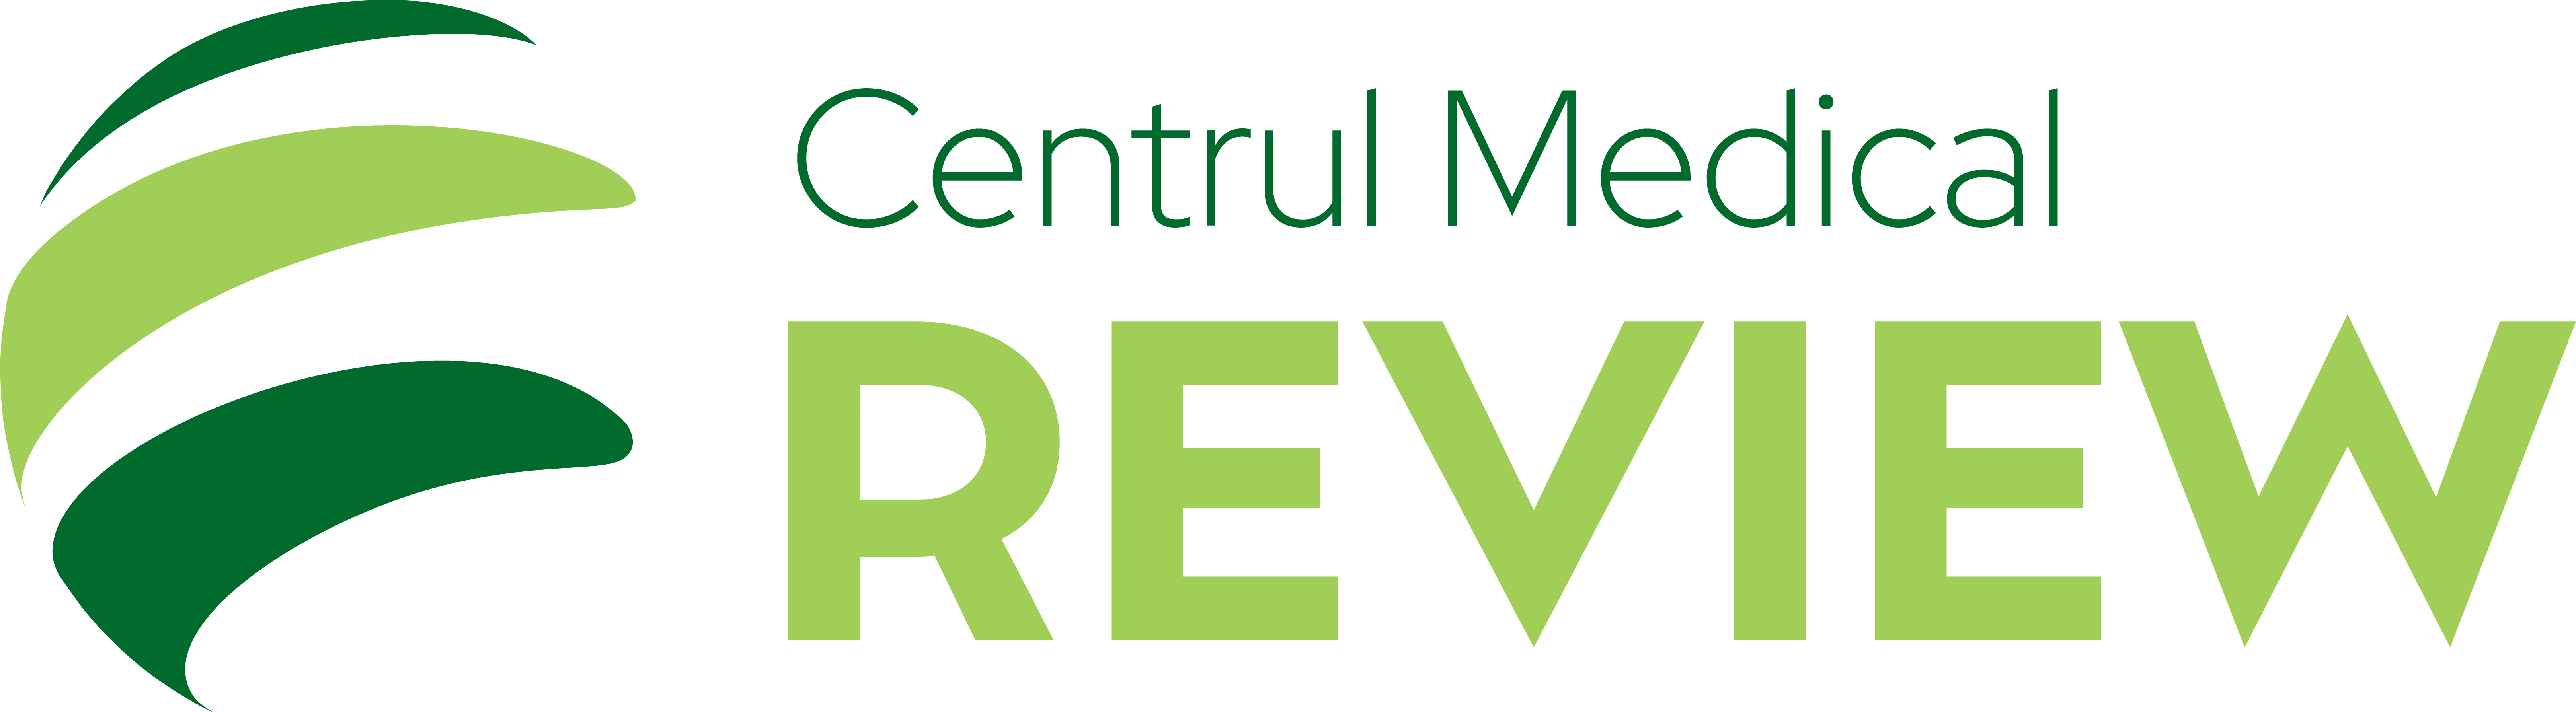 Centrul Medical Review